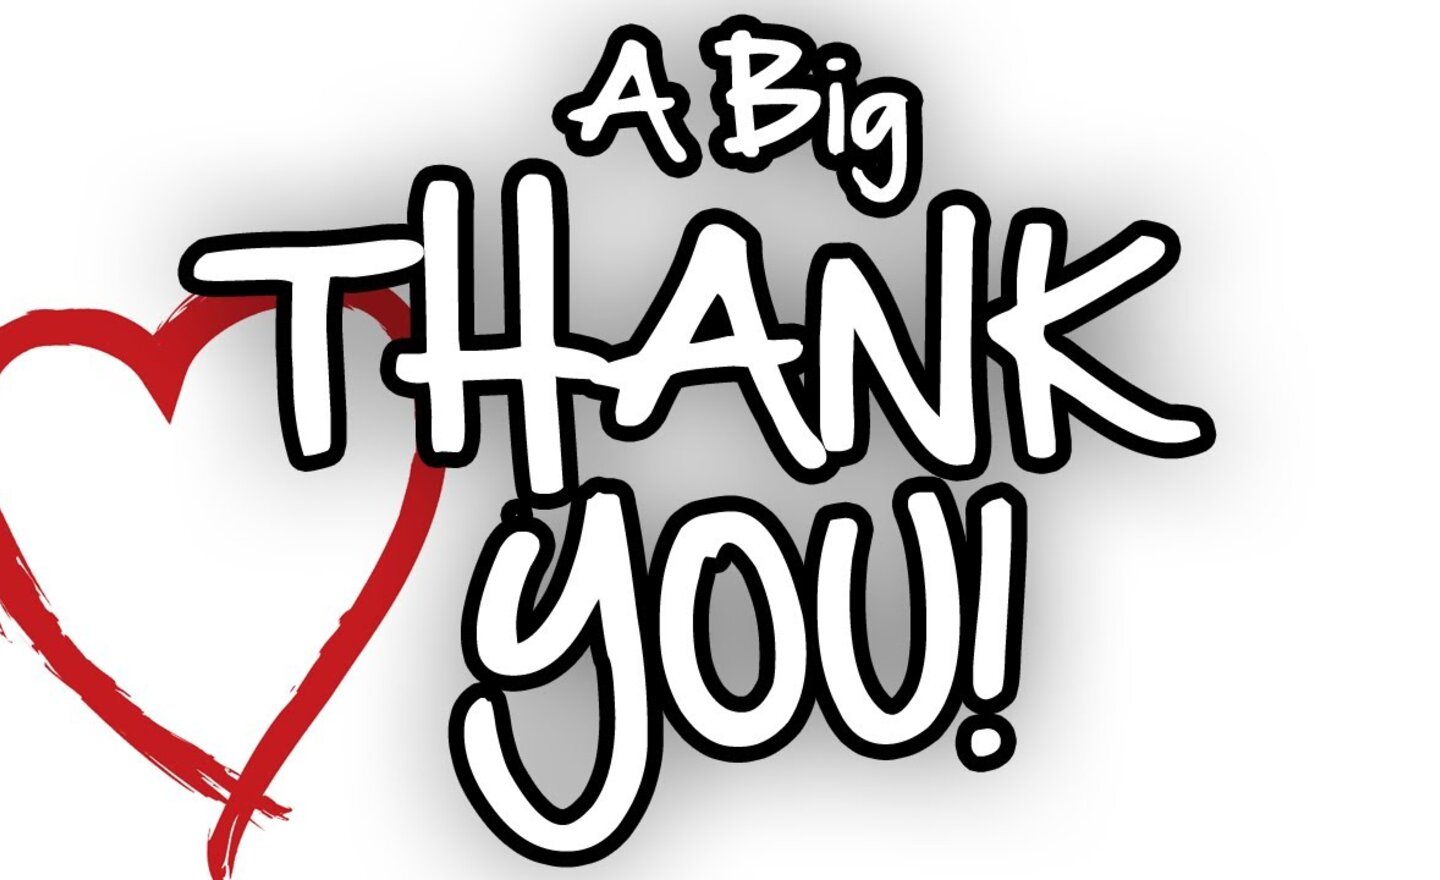 Image of A Big THANK YOU!